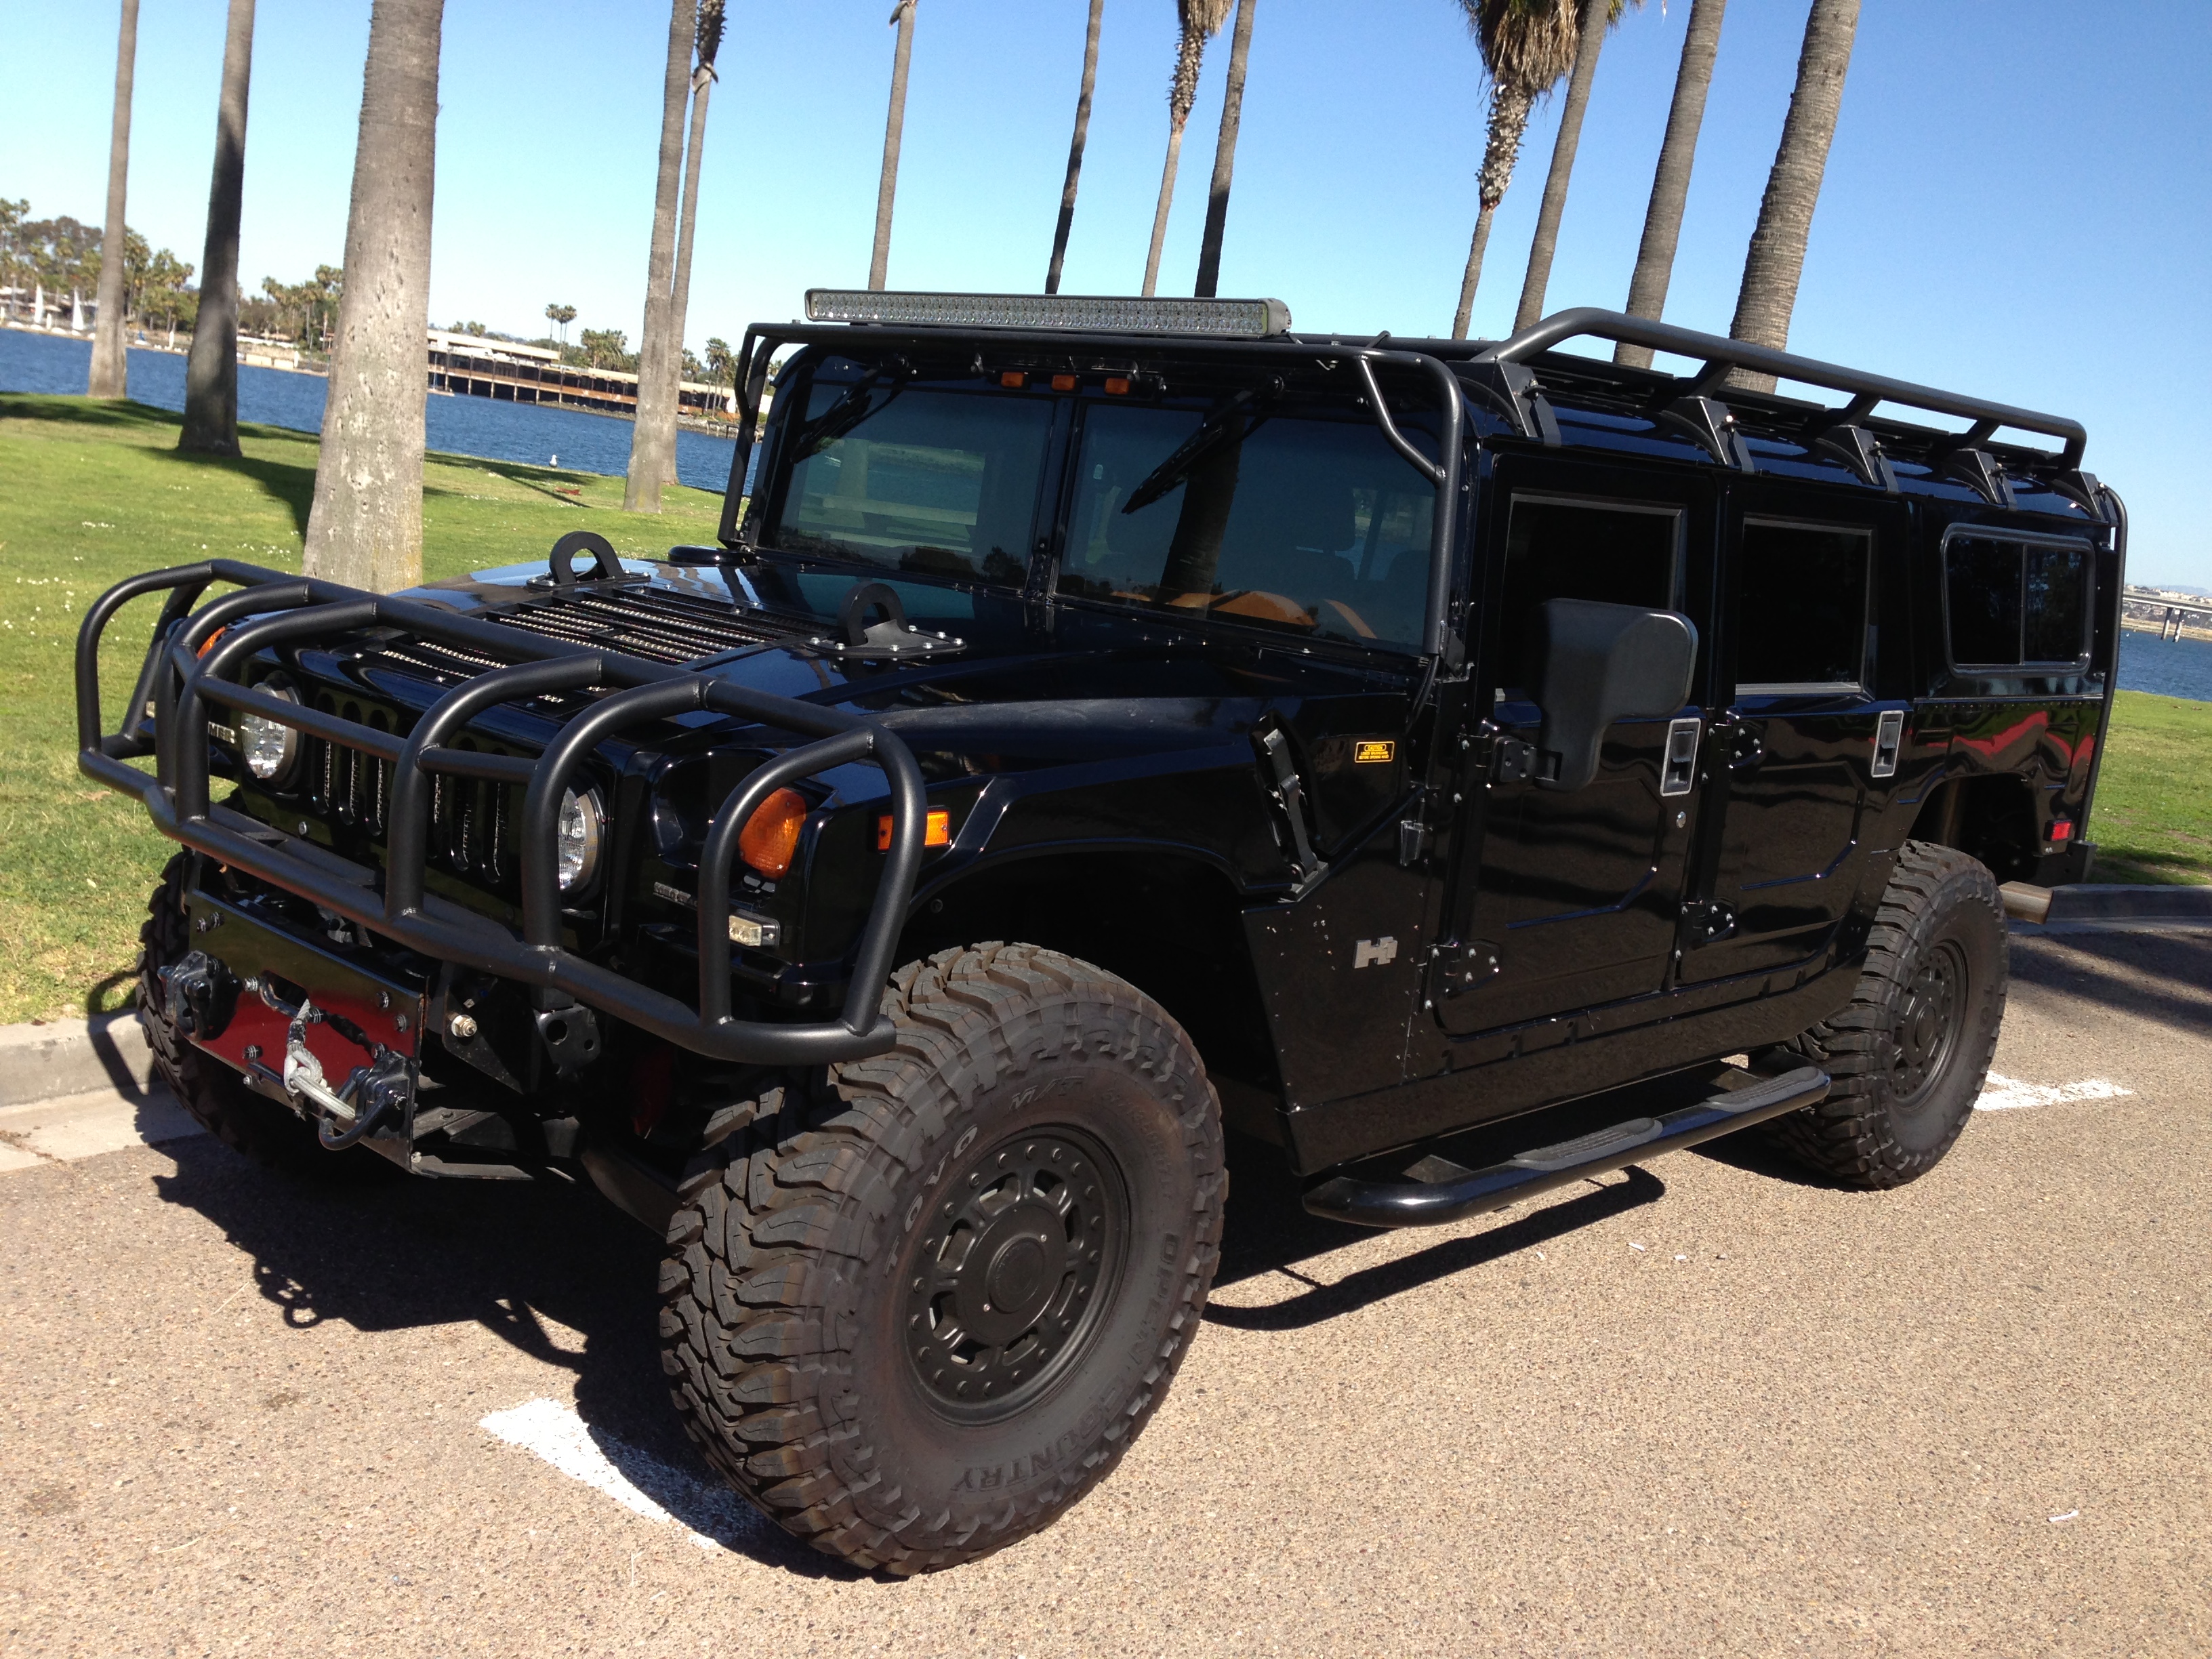 sold—Hummer h1 “Alpha interceptor search and rescue edition” , built duramax turbo diesel 6 speed allison transmission